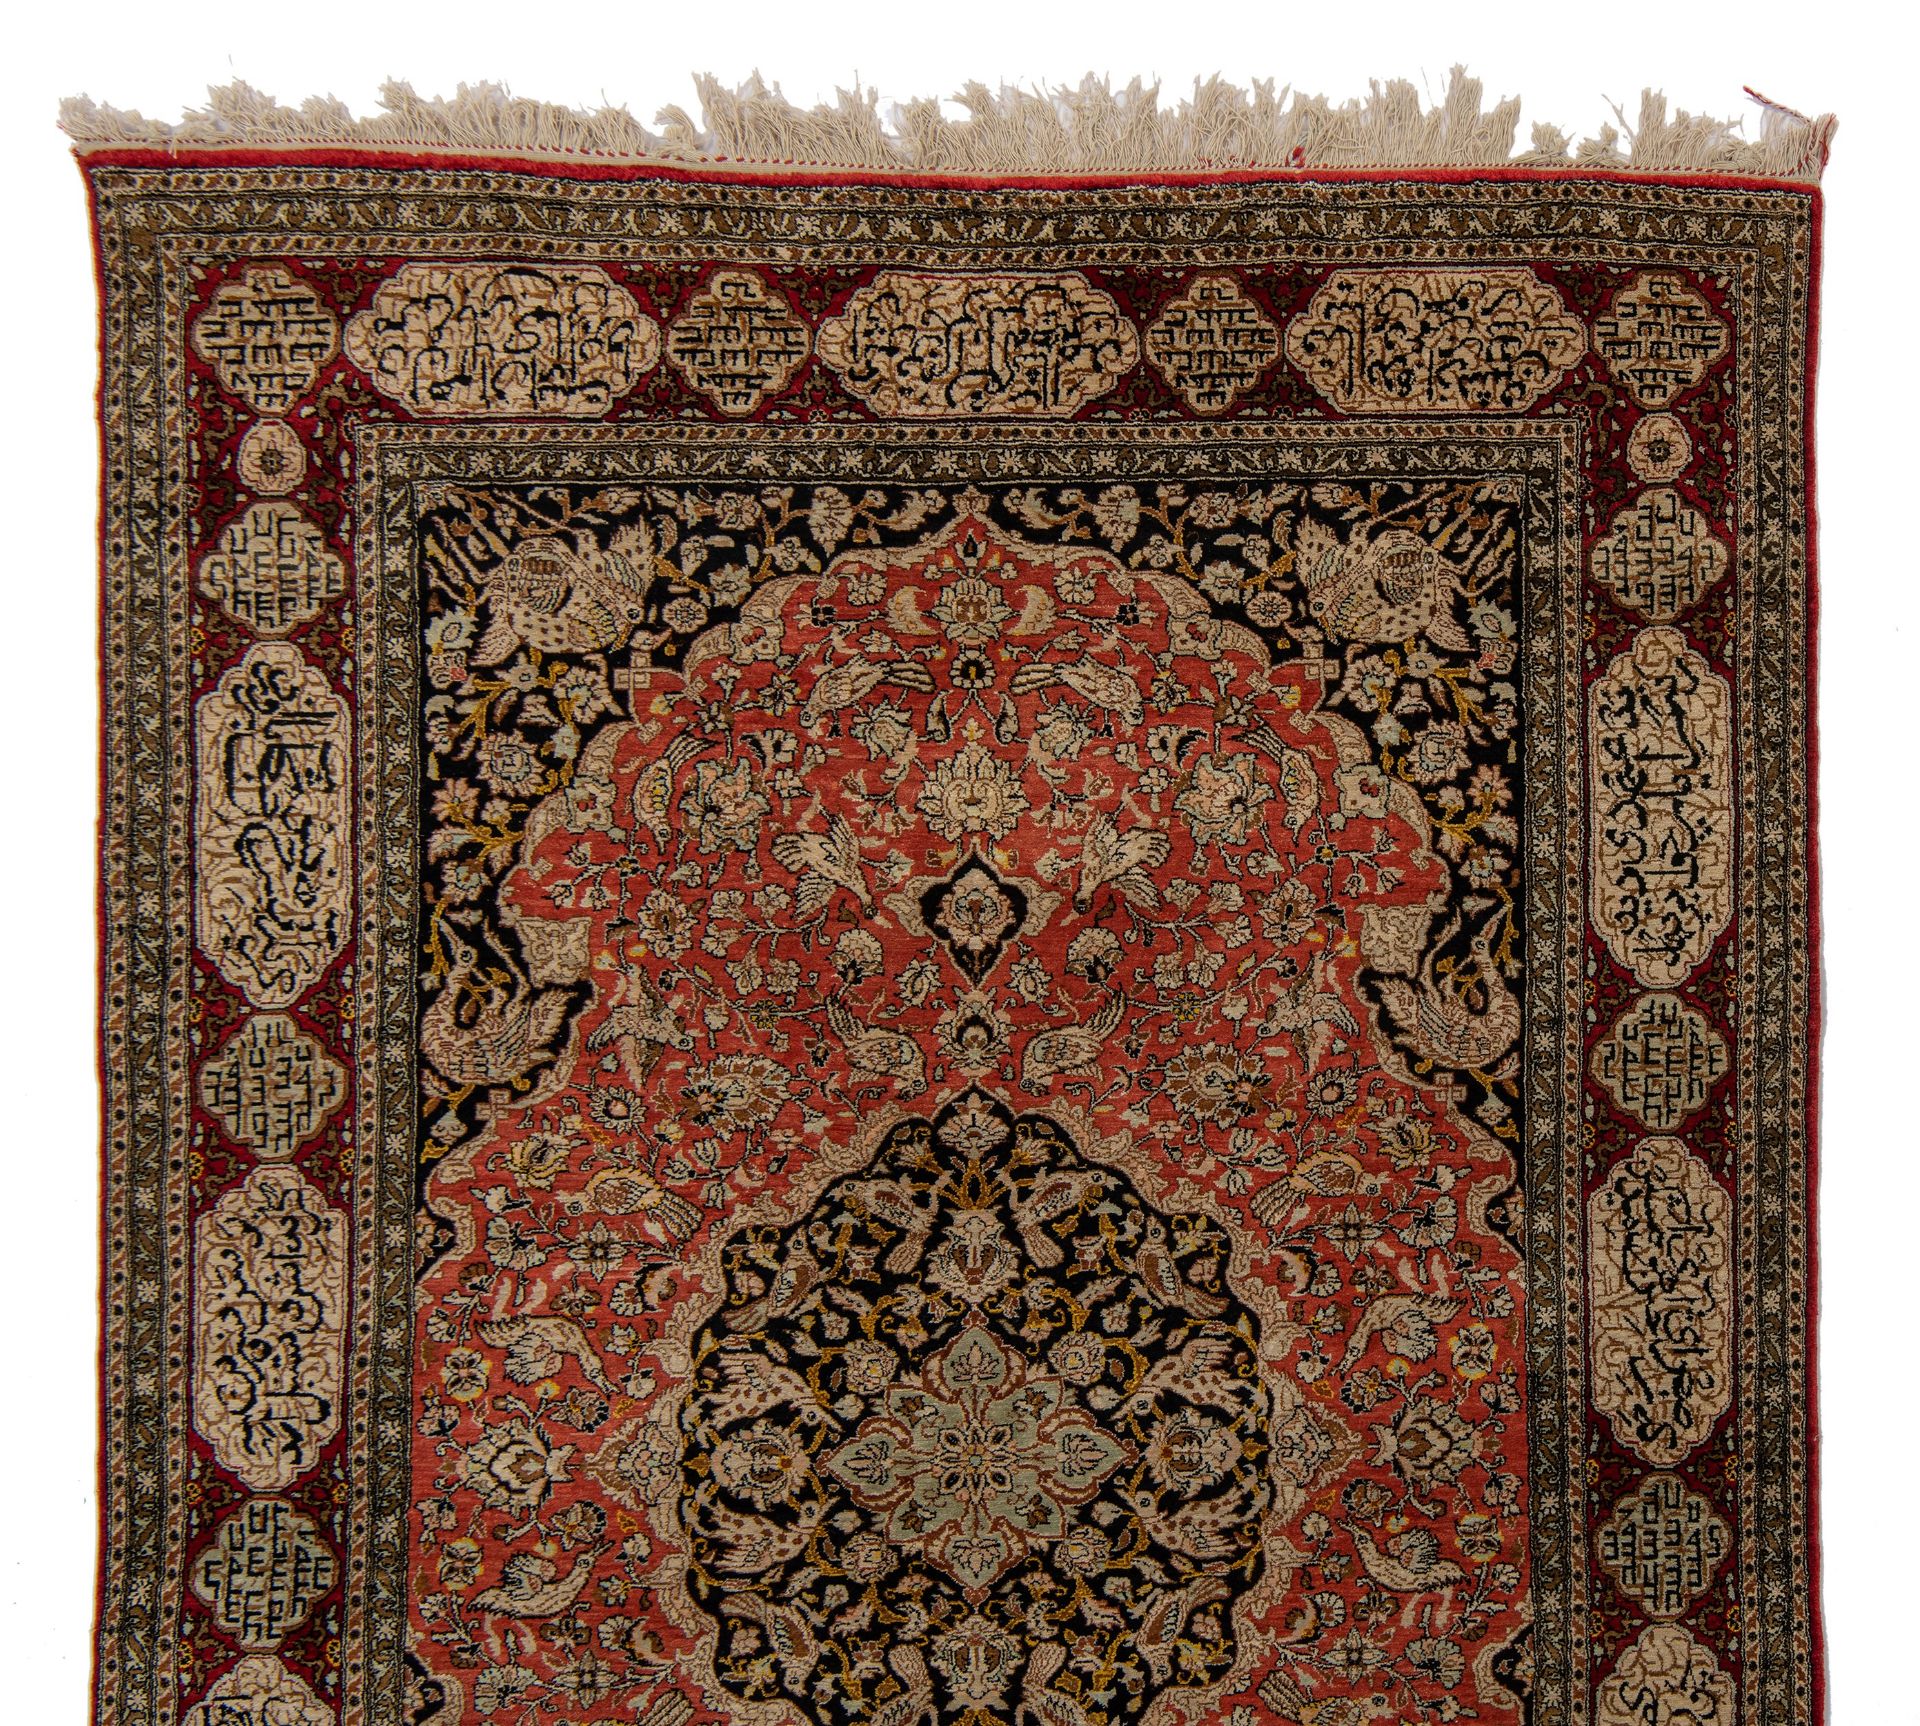 An Iran Ghoum carpet, floral decorated with birds, the borders with texts, silk, 137 x 216 cm - Image 5 of 6